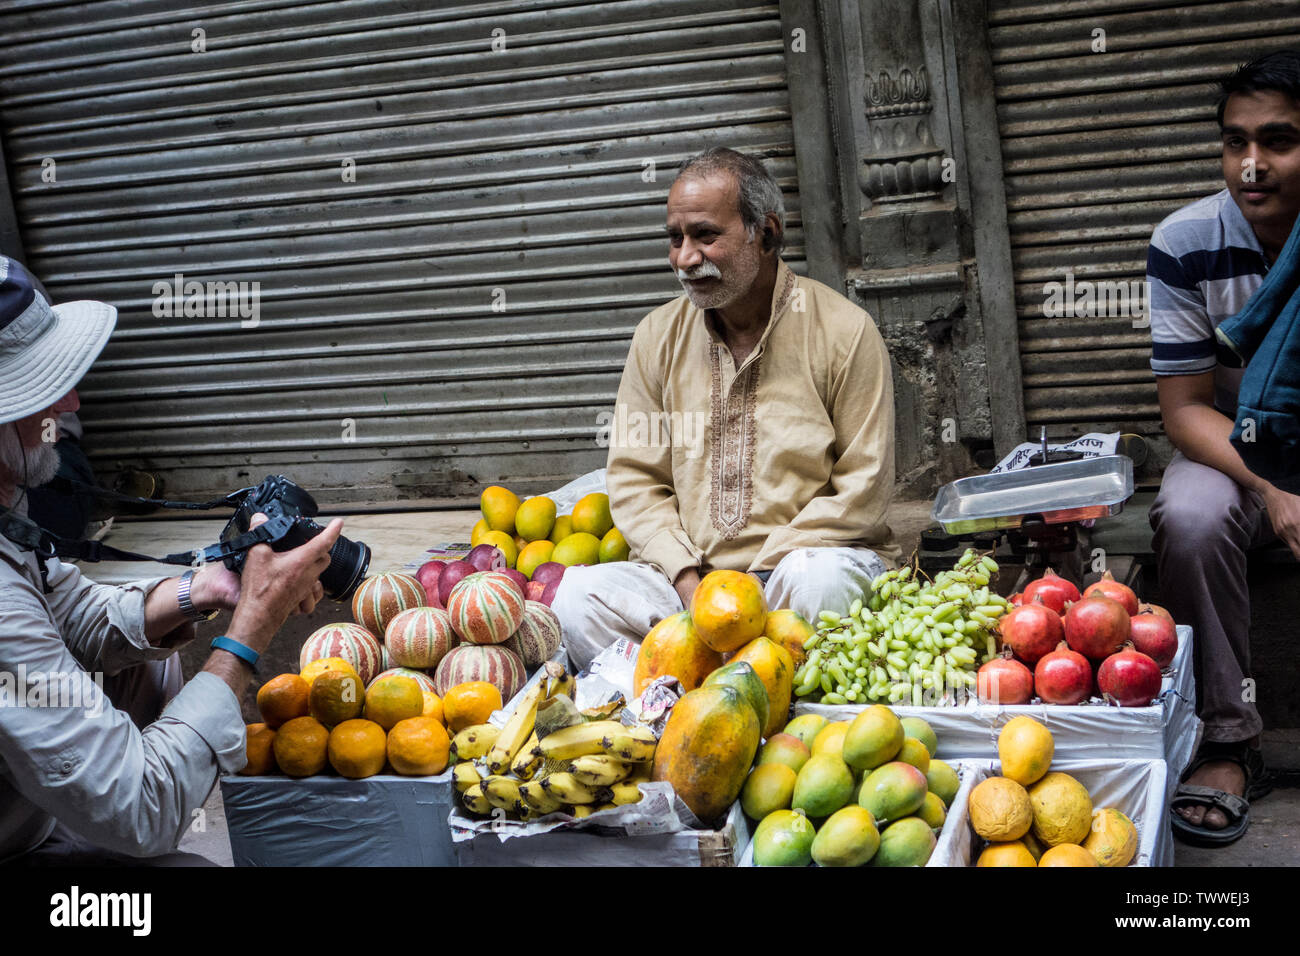 Market vendor of fruit and vegetables having his photograph taken by a tourist in Old Delhi, New Delhi, India Stock Photo